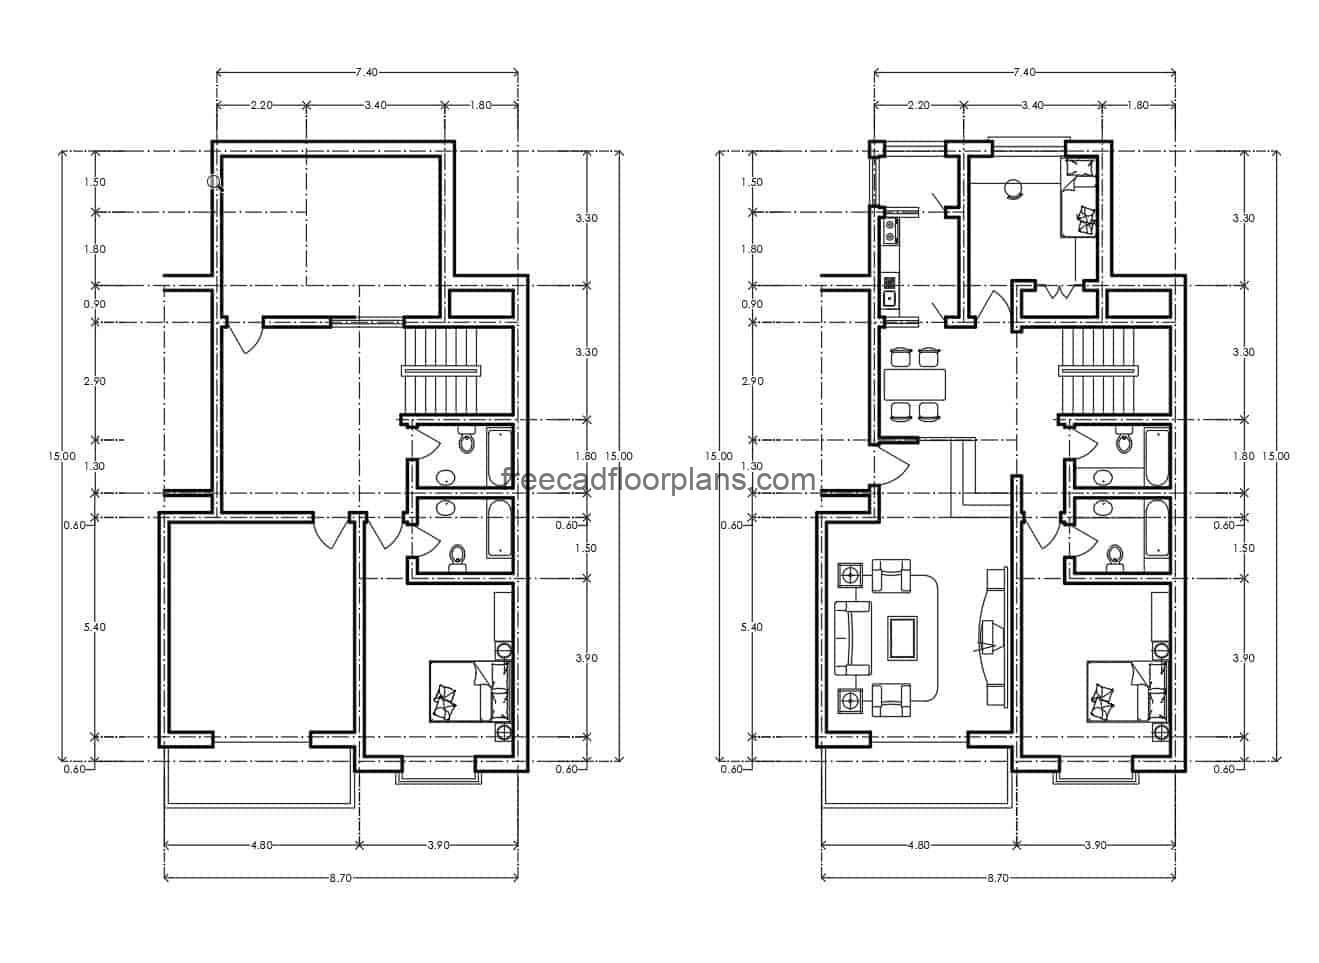 Architectural and dimensional plan of a small residential building with two bedrooms, two bathrooms, living room, kitchen, dining room and small laundry area, DWG file for download